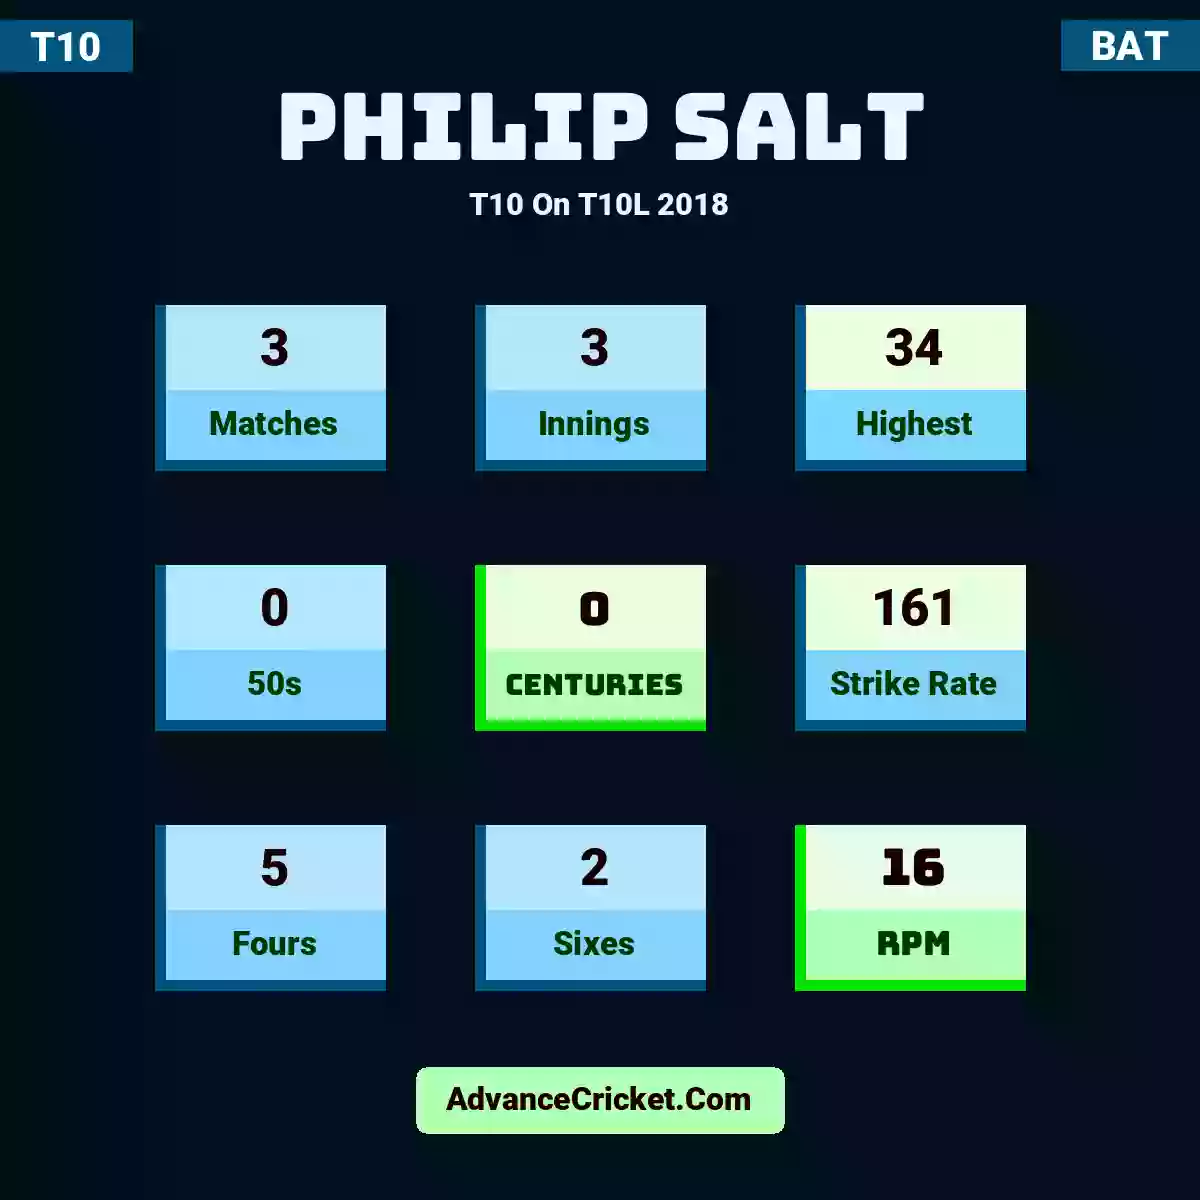 Philip Salt T10  On T10L 2018, Philip Salt played 3 matches, scored 34 runs as highest, 0 half-centuries, and 0 centuries, with a strike rate of 161. P.Salt hit 5 fours and 2 sixes, with an RPM of 16.